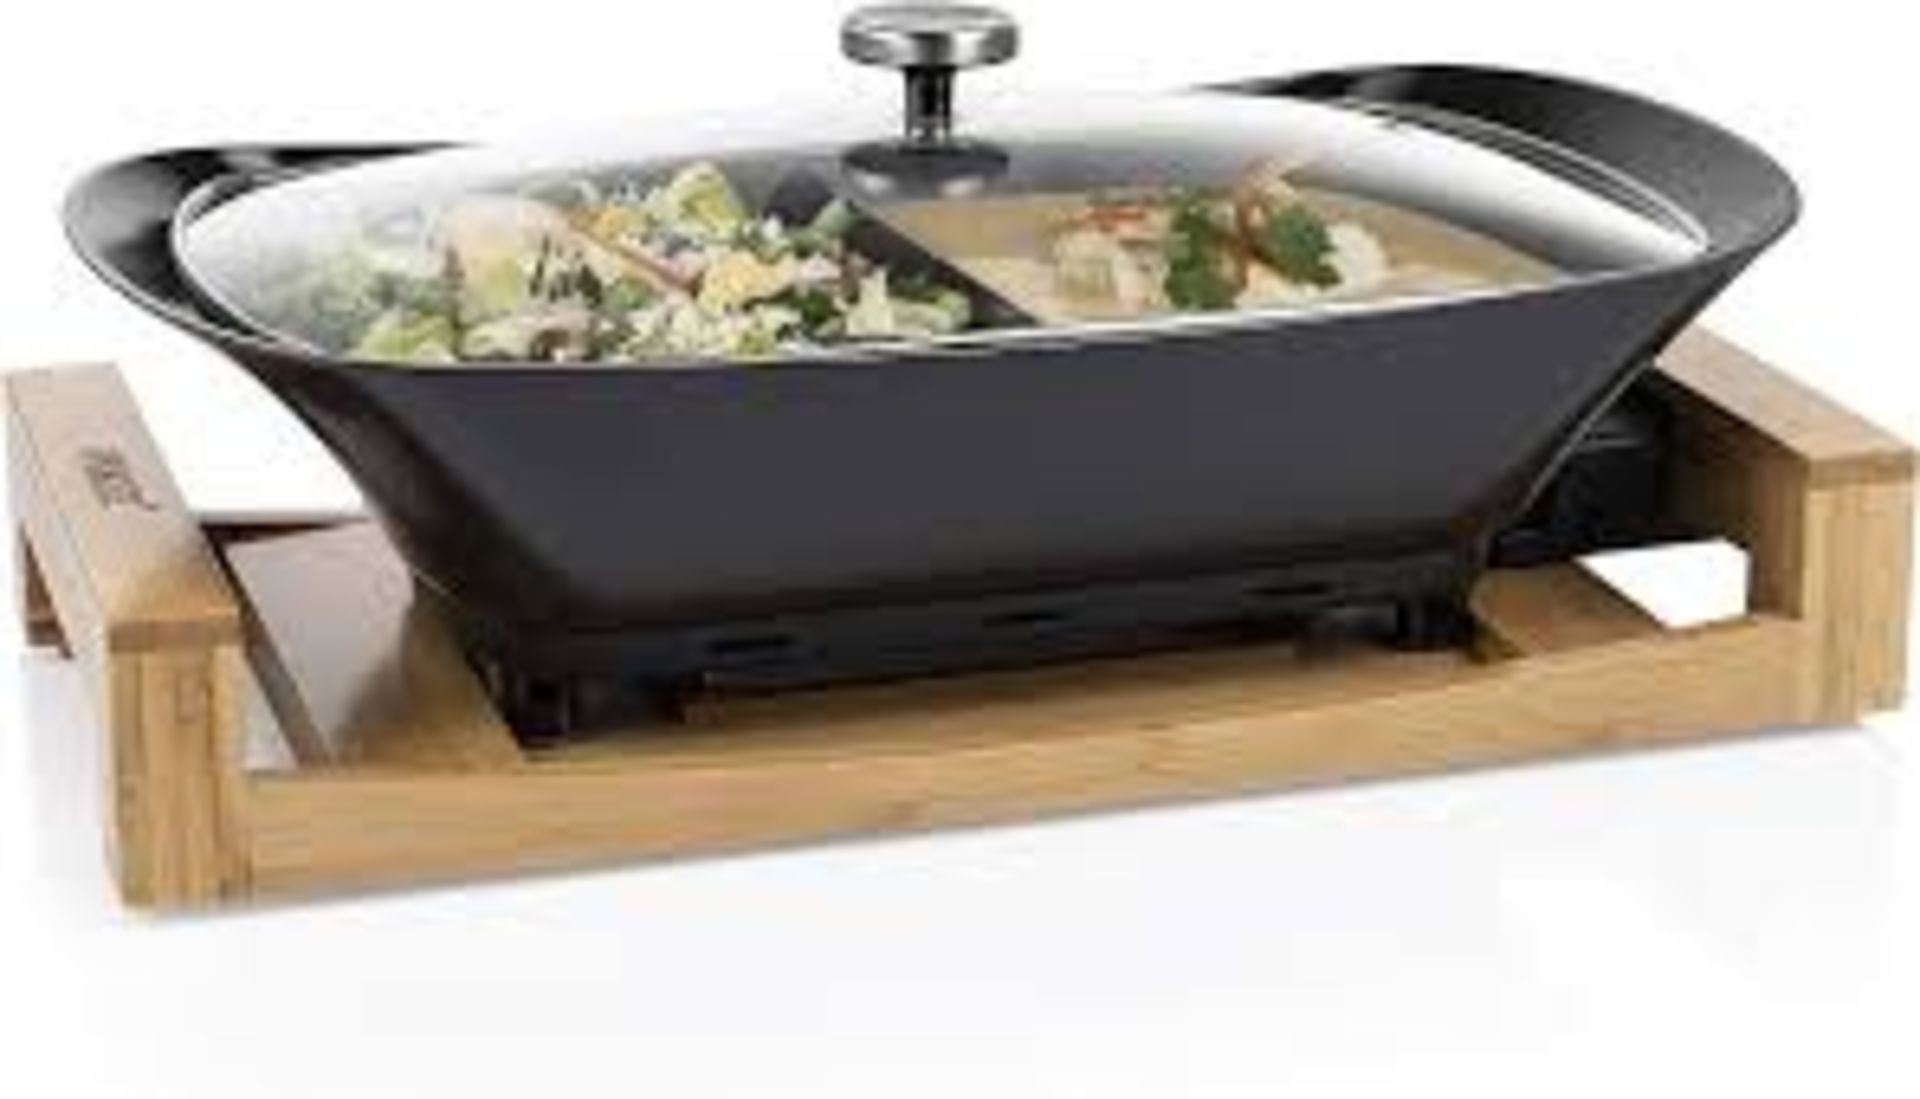 Princess Multi Cook, Tabletop Cooker, Food Warmer, Buffet Server, 1600 W, Bamboo Stand, 4L